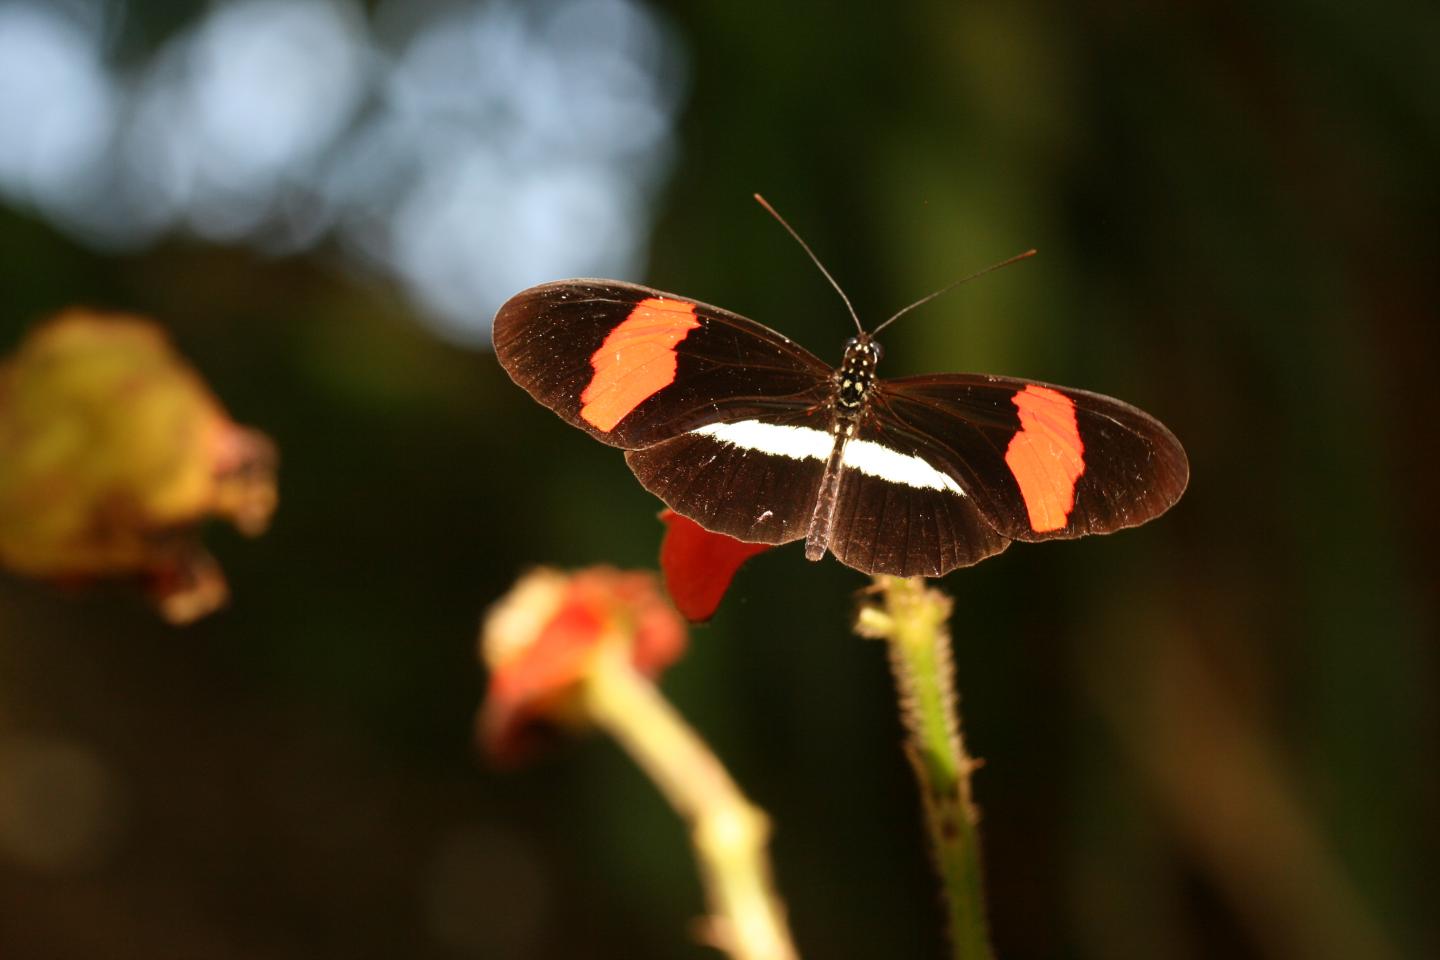 Passionvine Butterfly in Panama